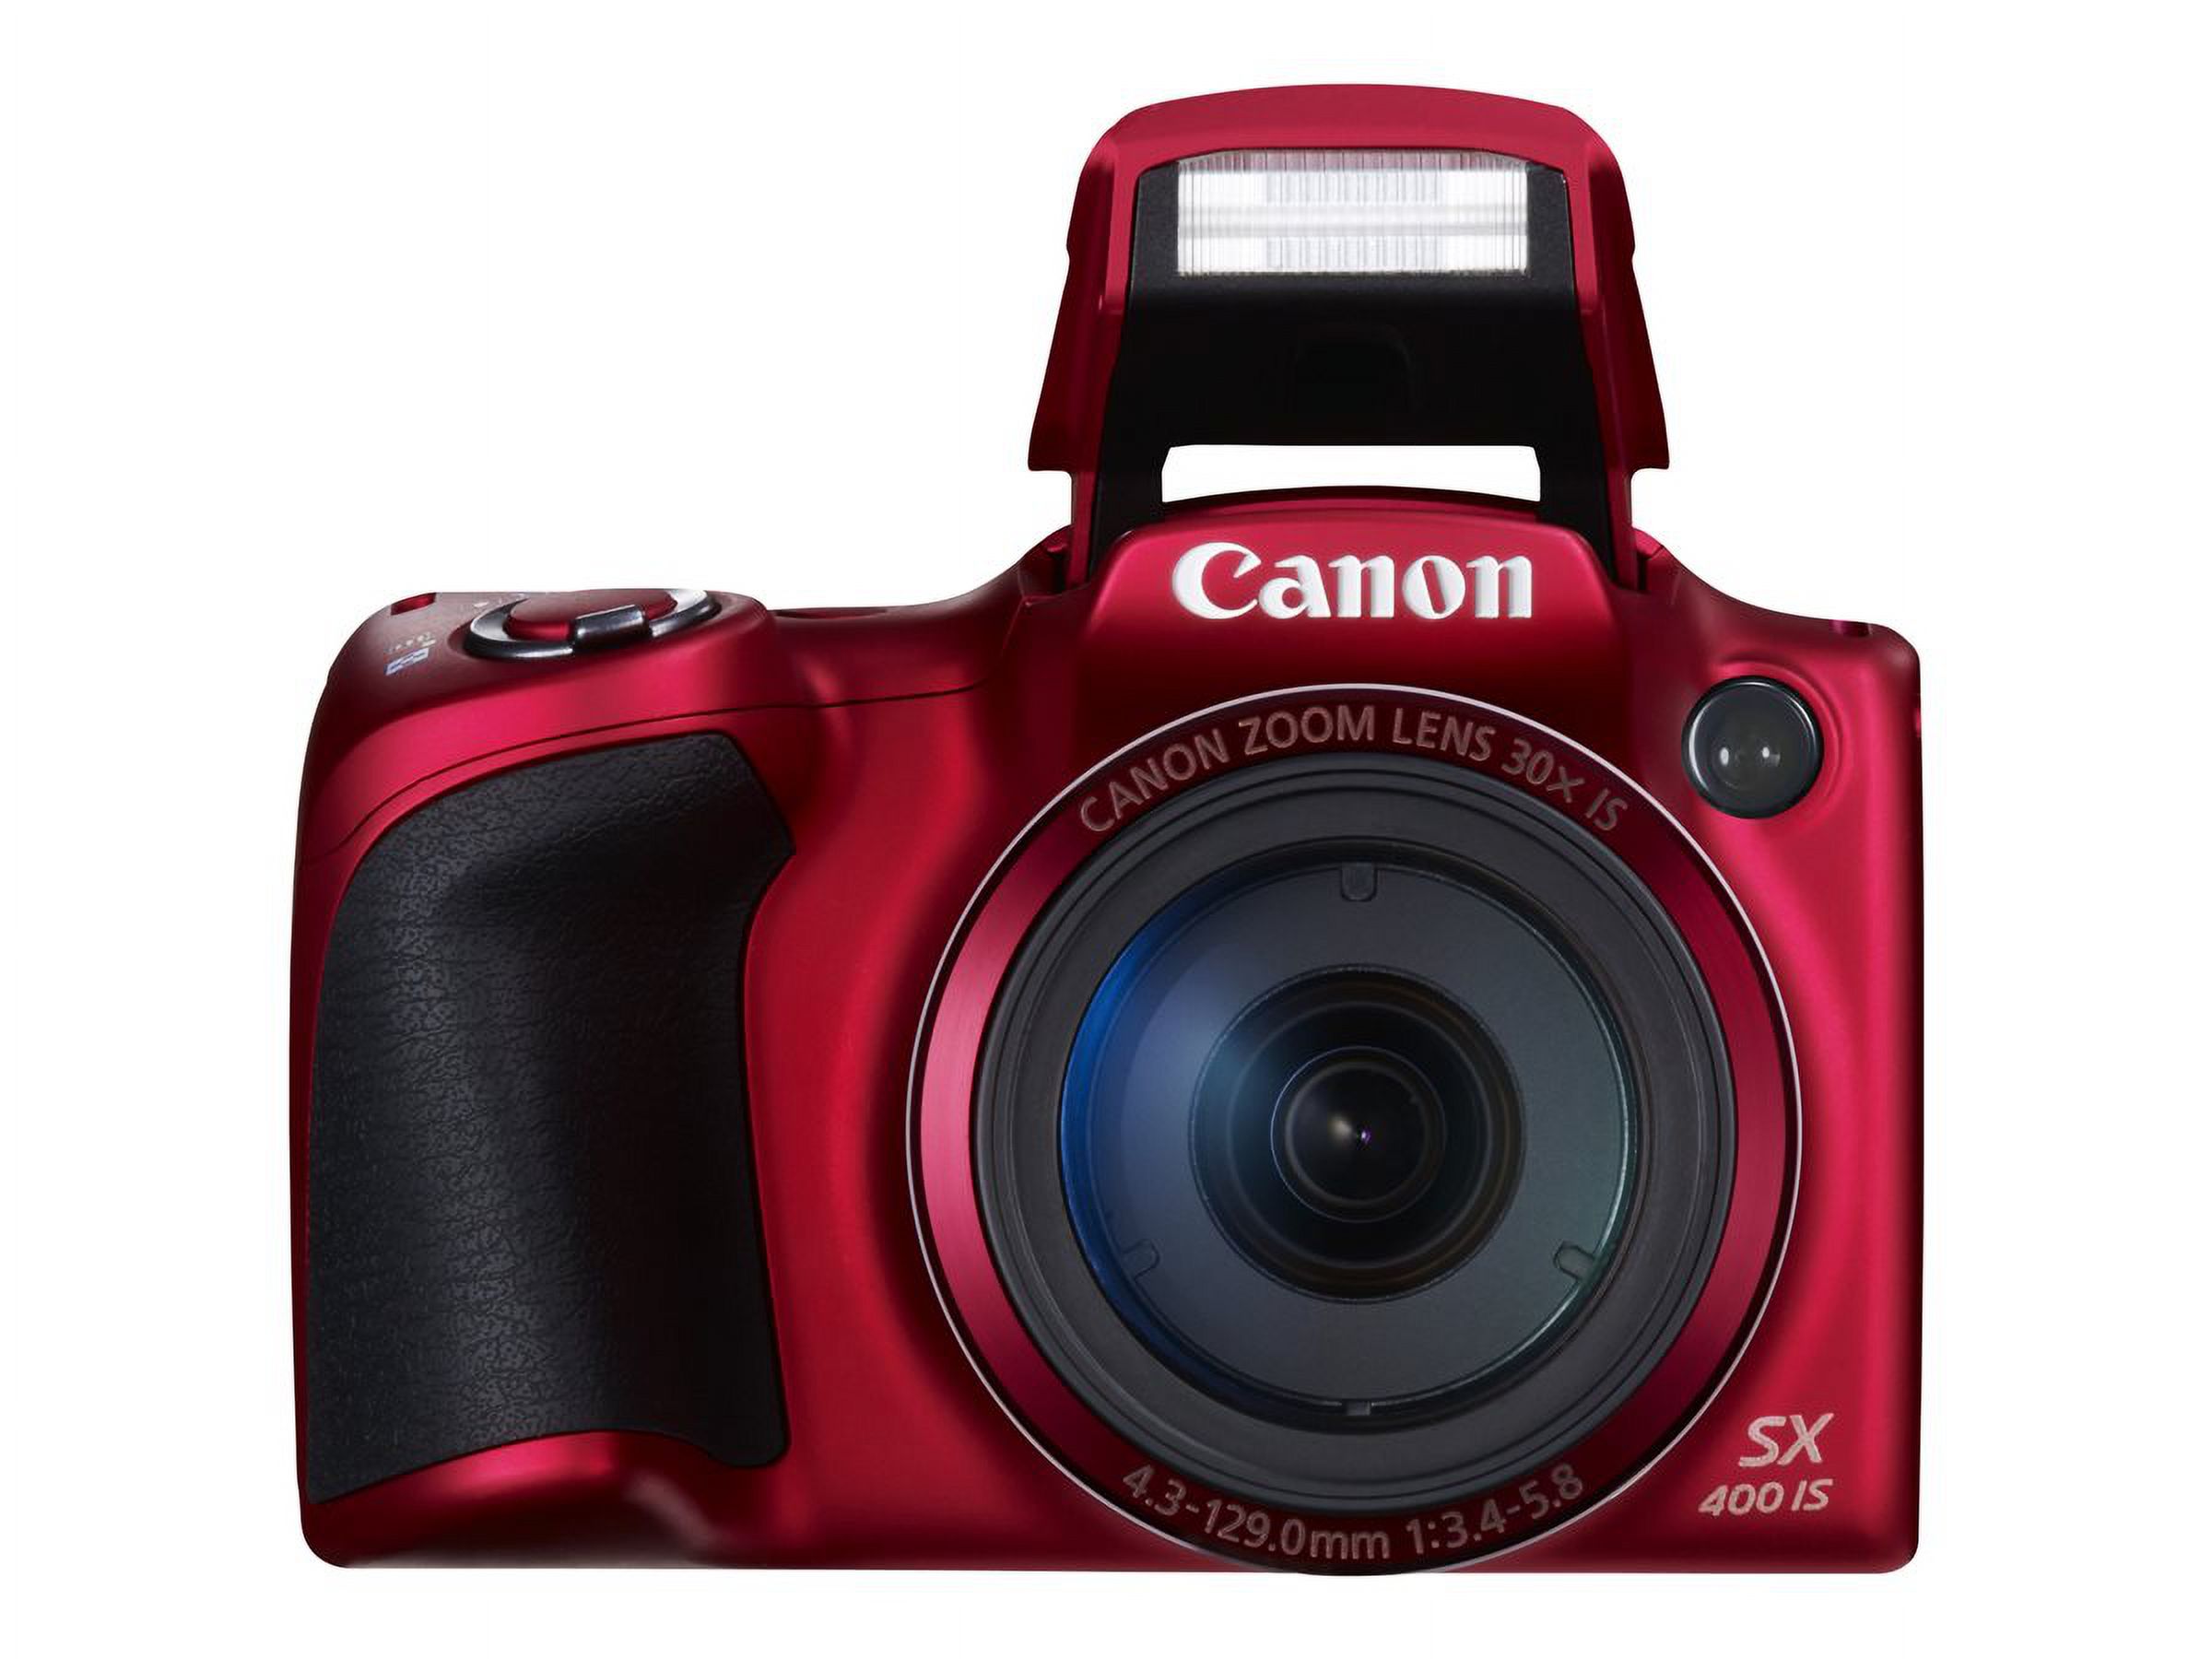 Canon PowerShot SX400 IS - Digital camera - High Definition - compact - 16.0 MP - 30 x optical zoom - red - image 36 of 72